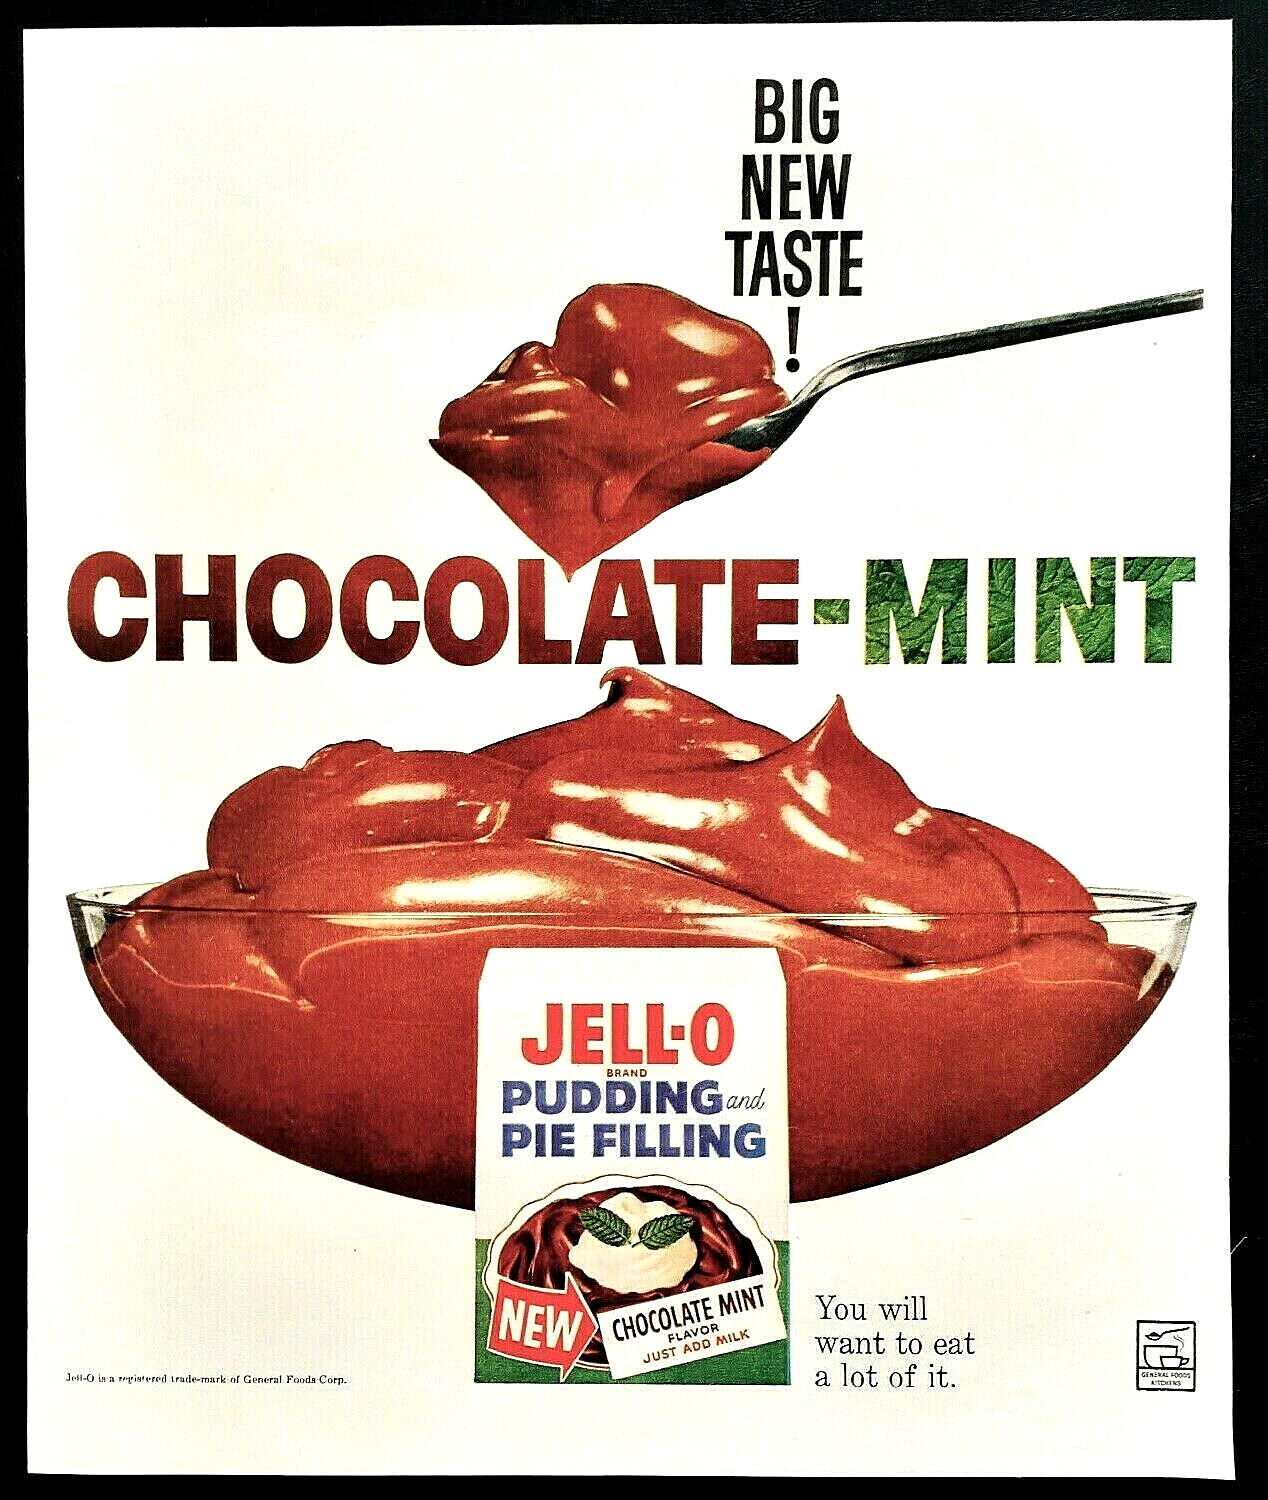 Jello Jell-O pudding ad vintage 1960 chocolate mint pie filling advertisement